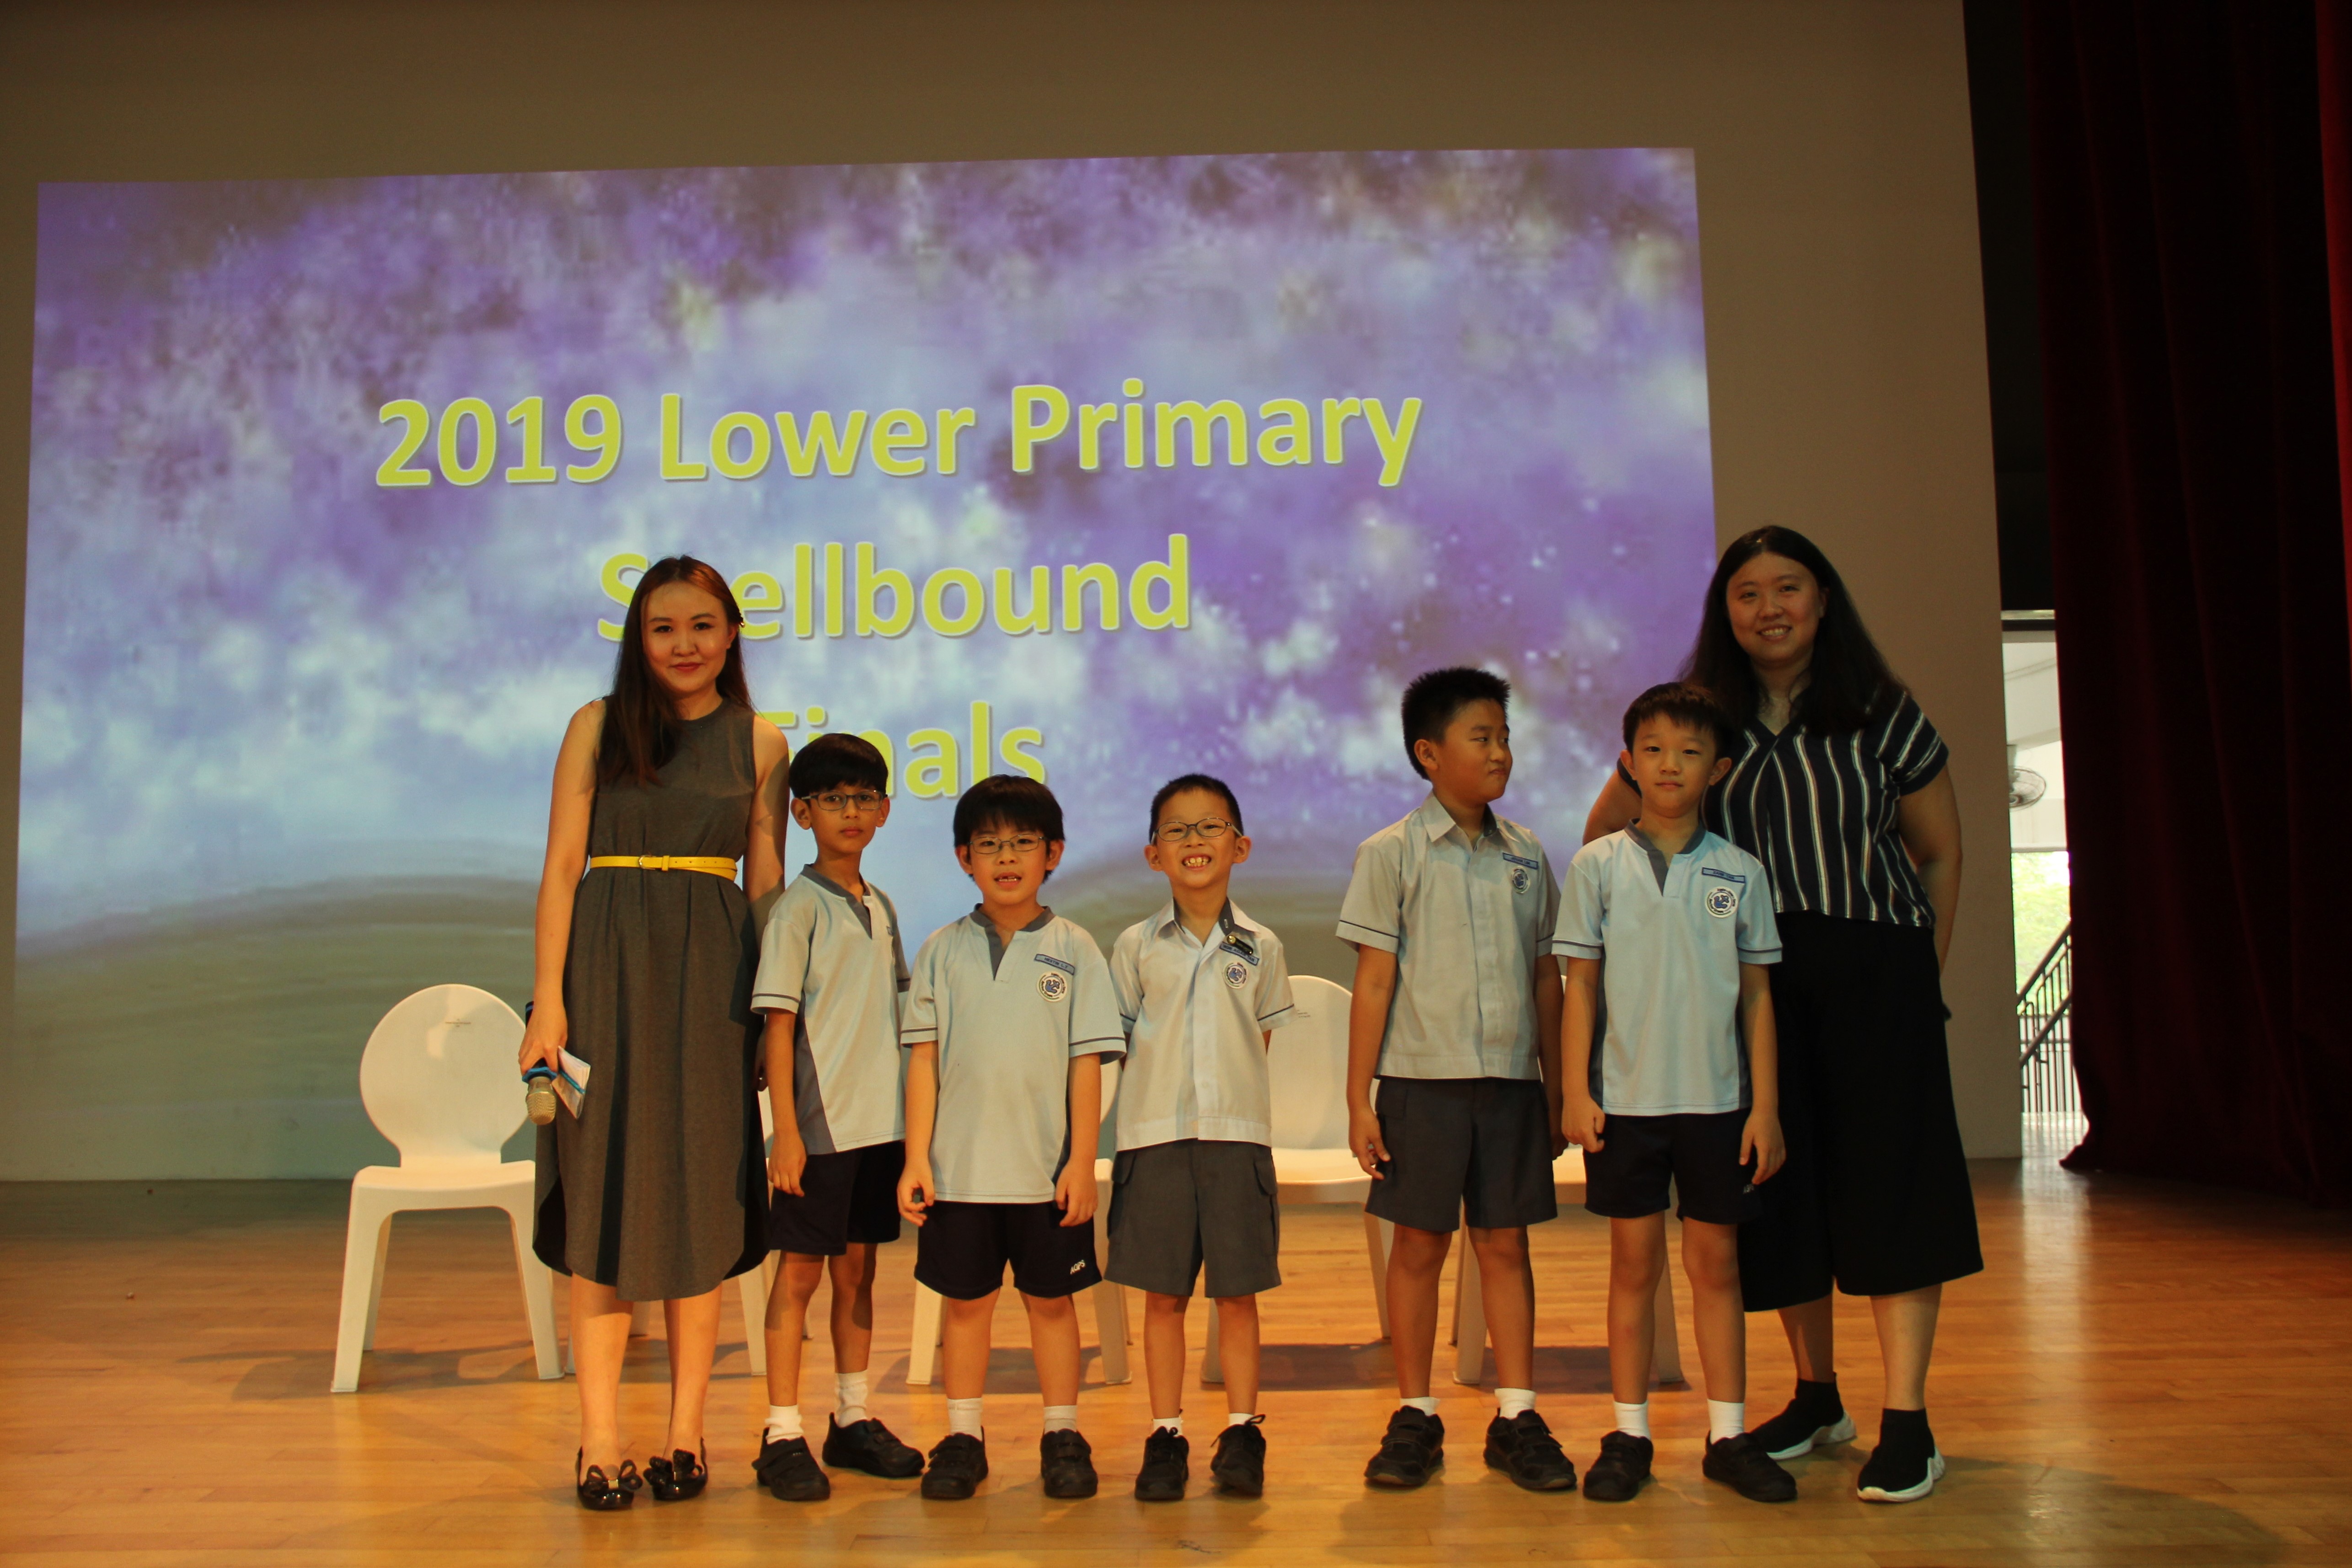 Lower Primary Spell bound Final